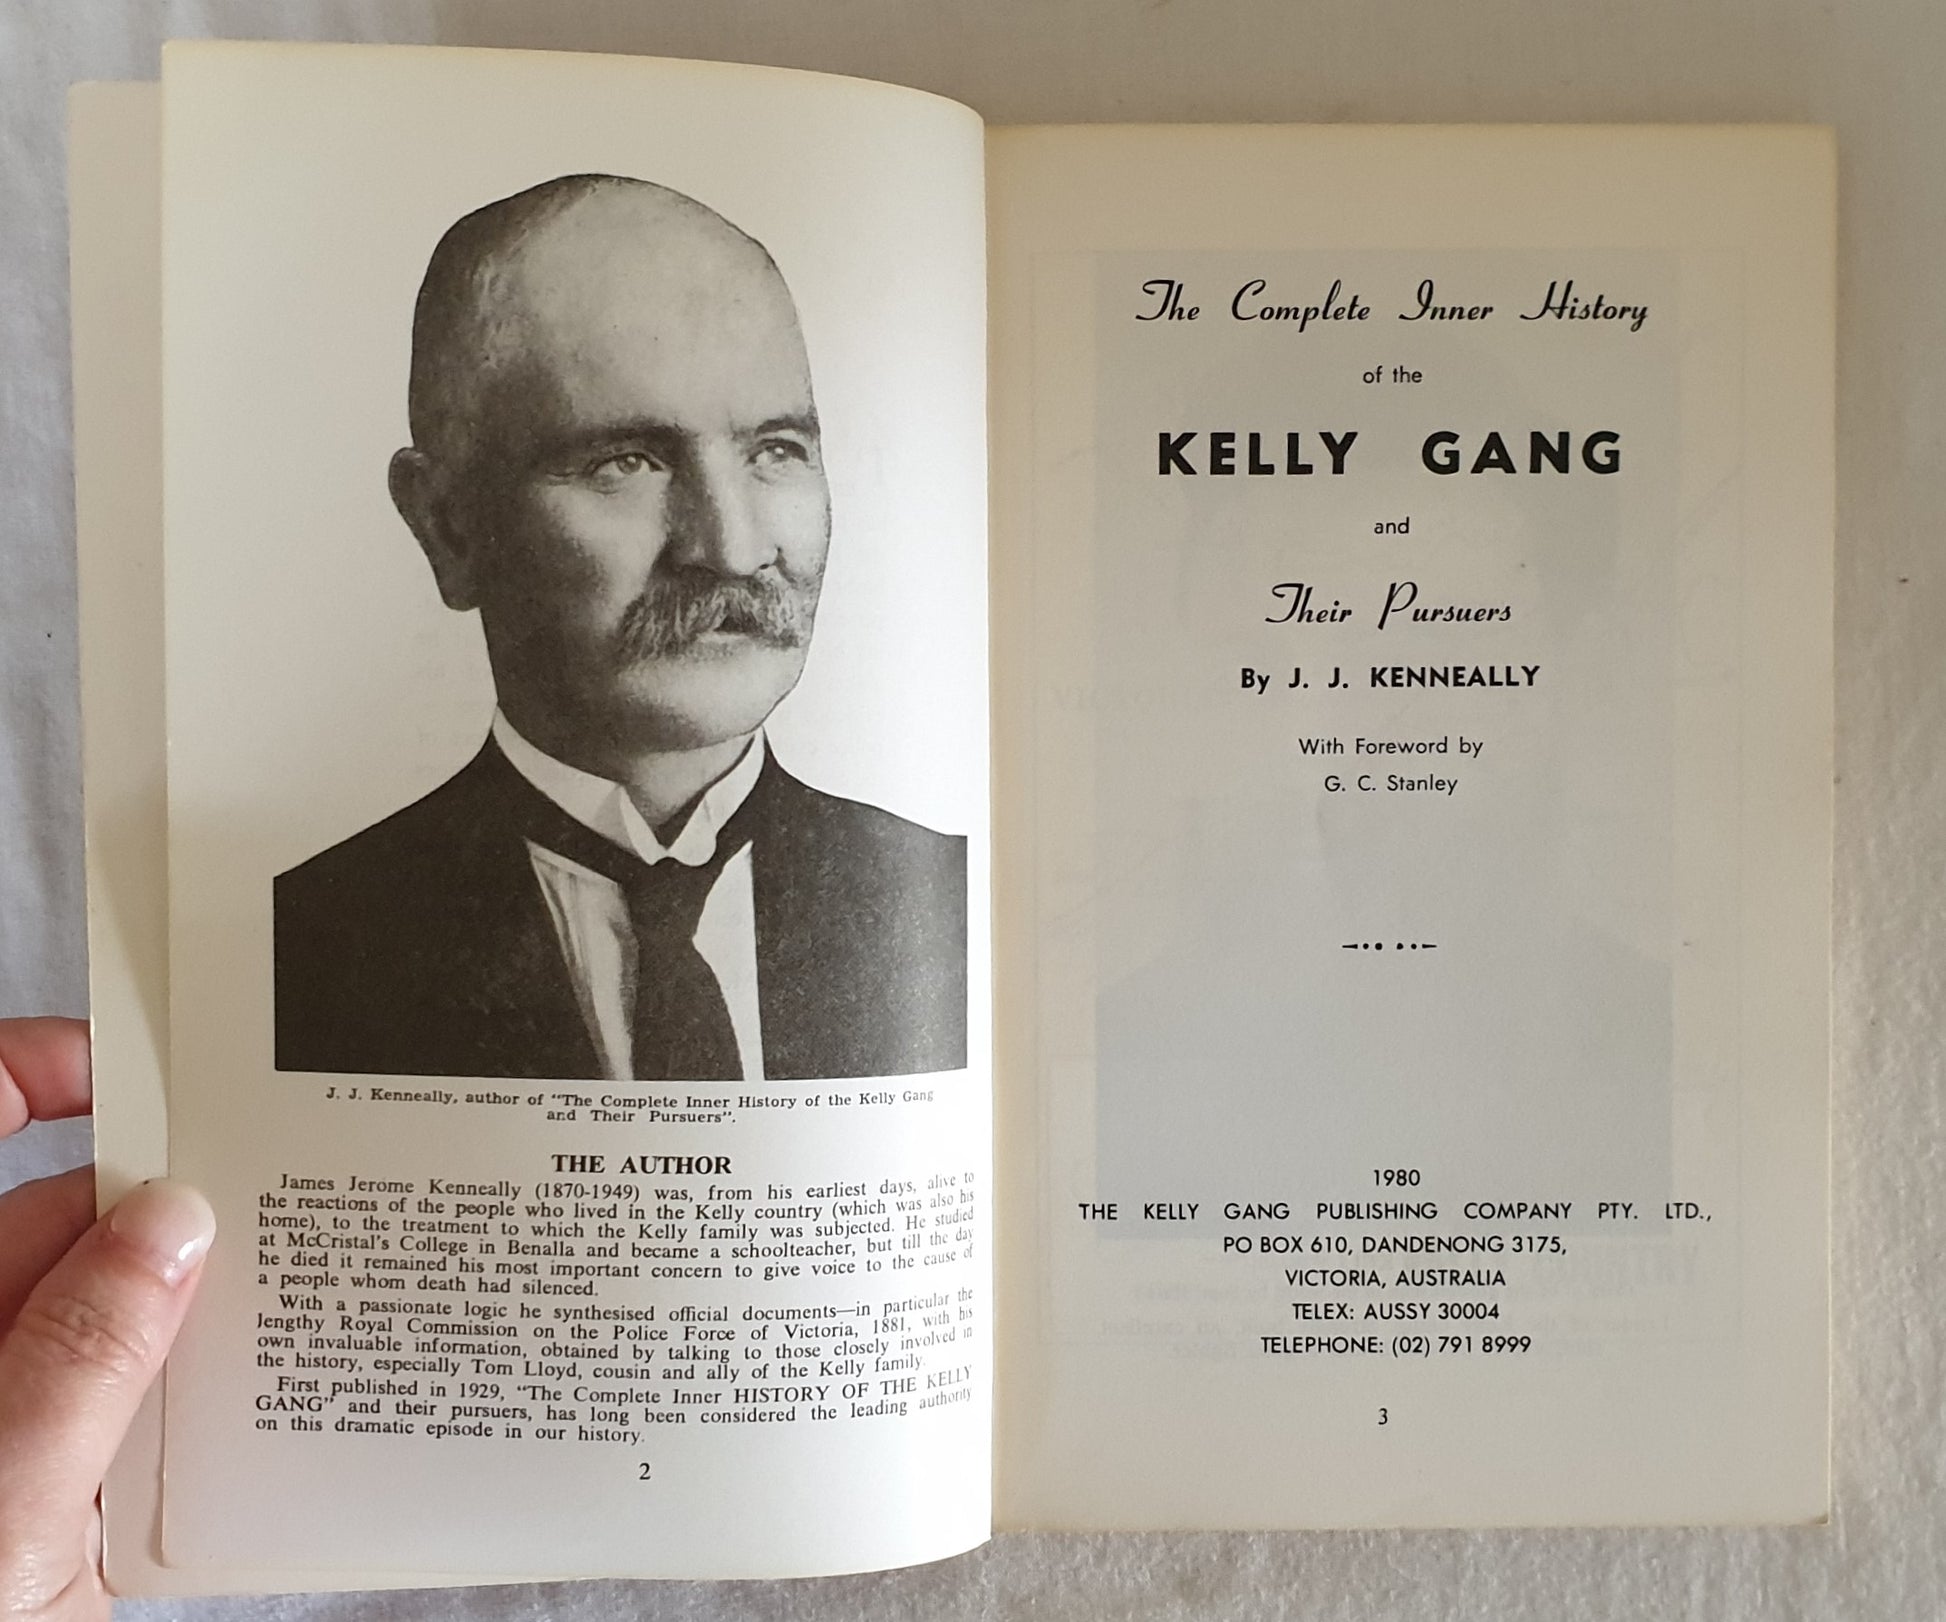 The Inner History of the Kelly Gang by J. J. Kenneally